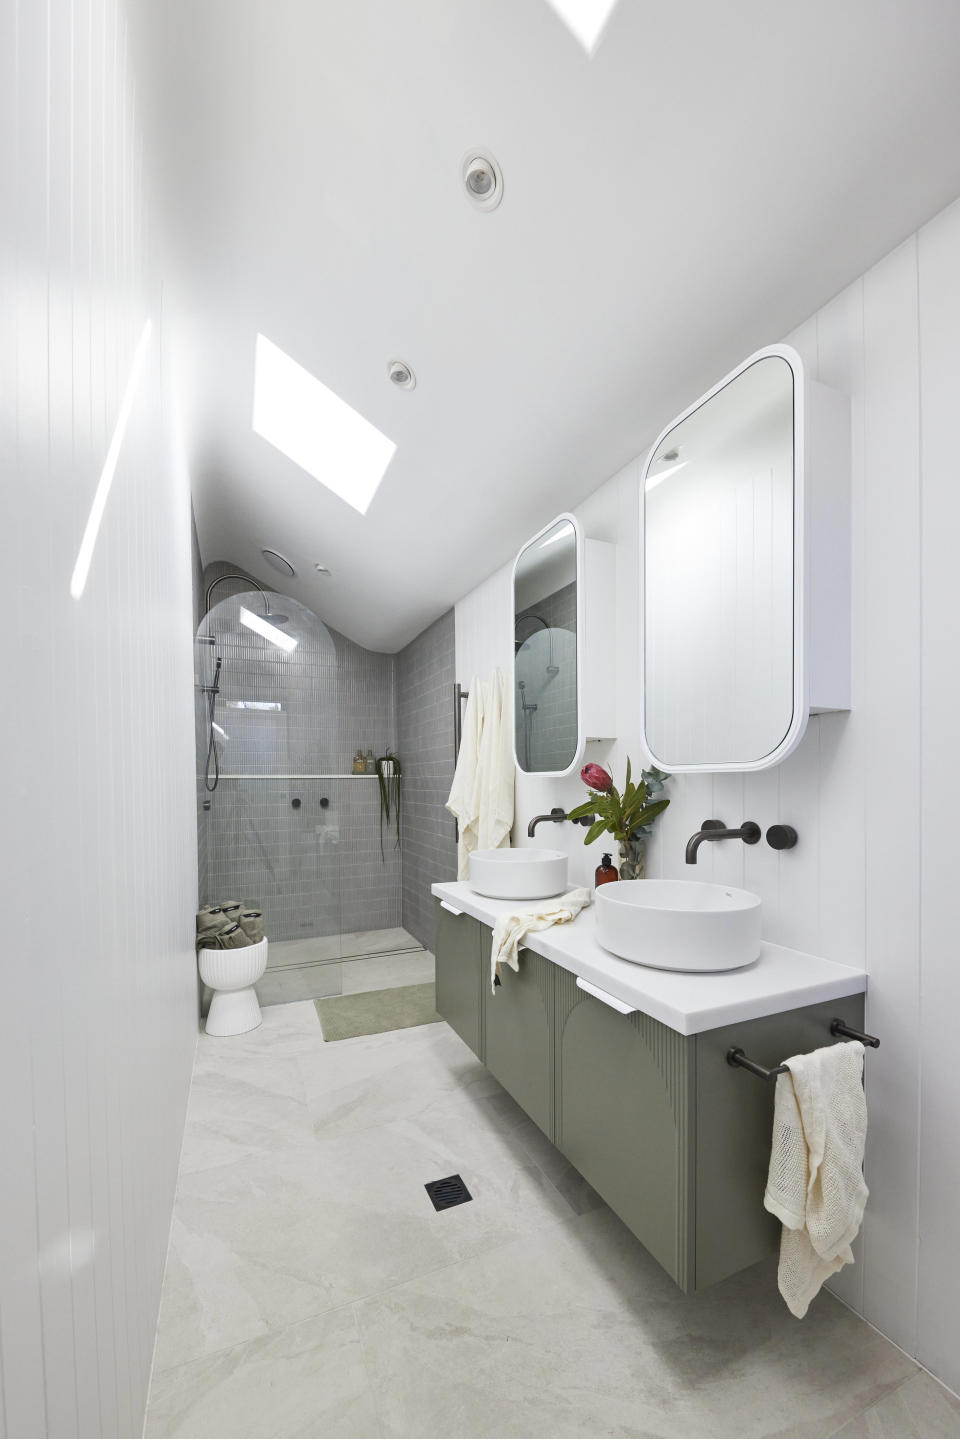 The vanity and benches on the right, skylights and white walls. 